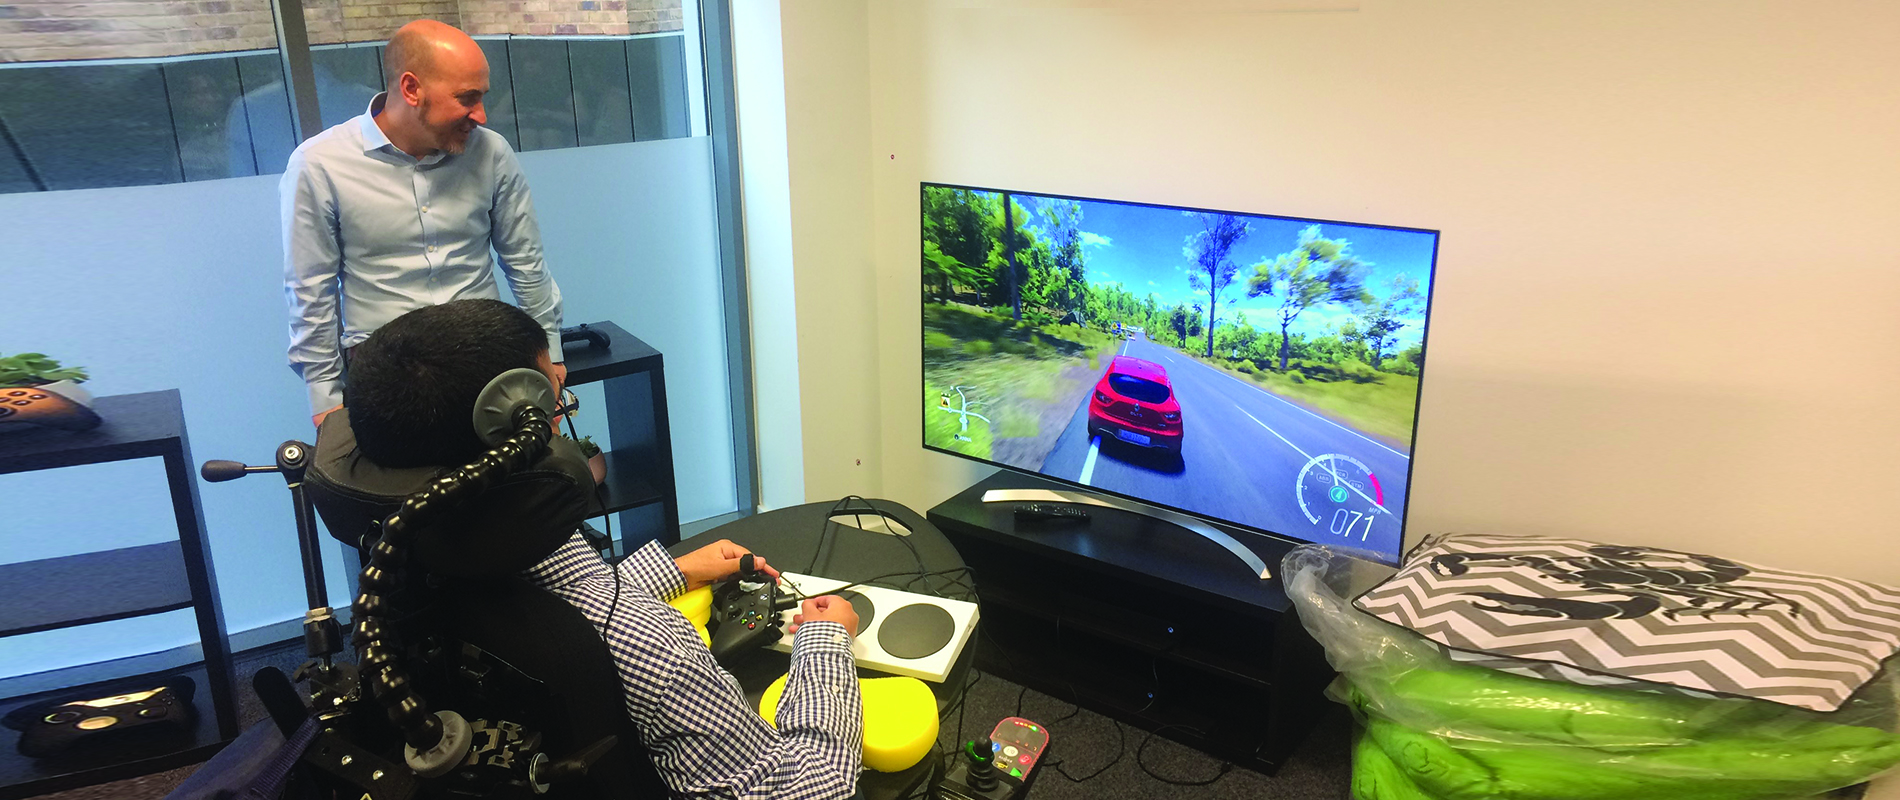 Hector Minto looks on as a gamer with disabilities uses XBox adaptive controller. The device screen displays a car racing game.